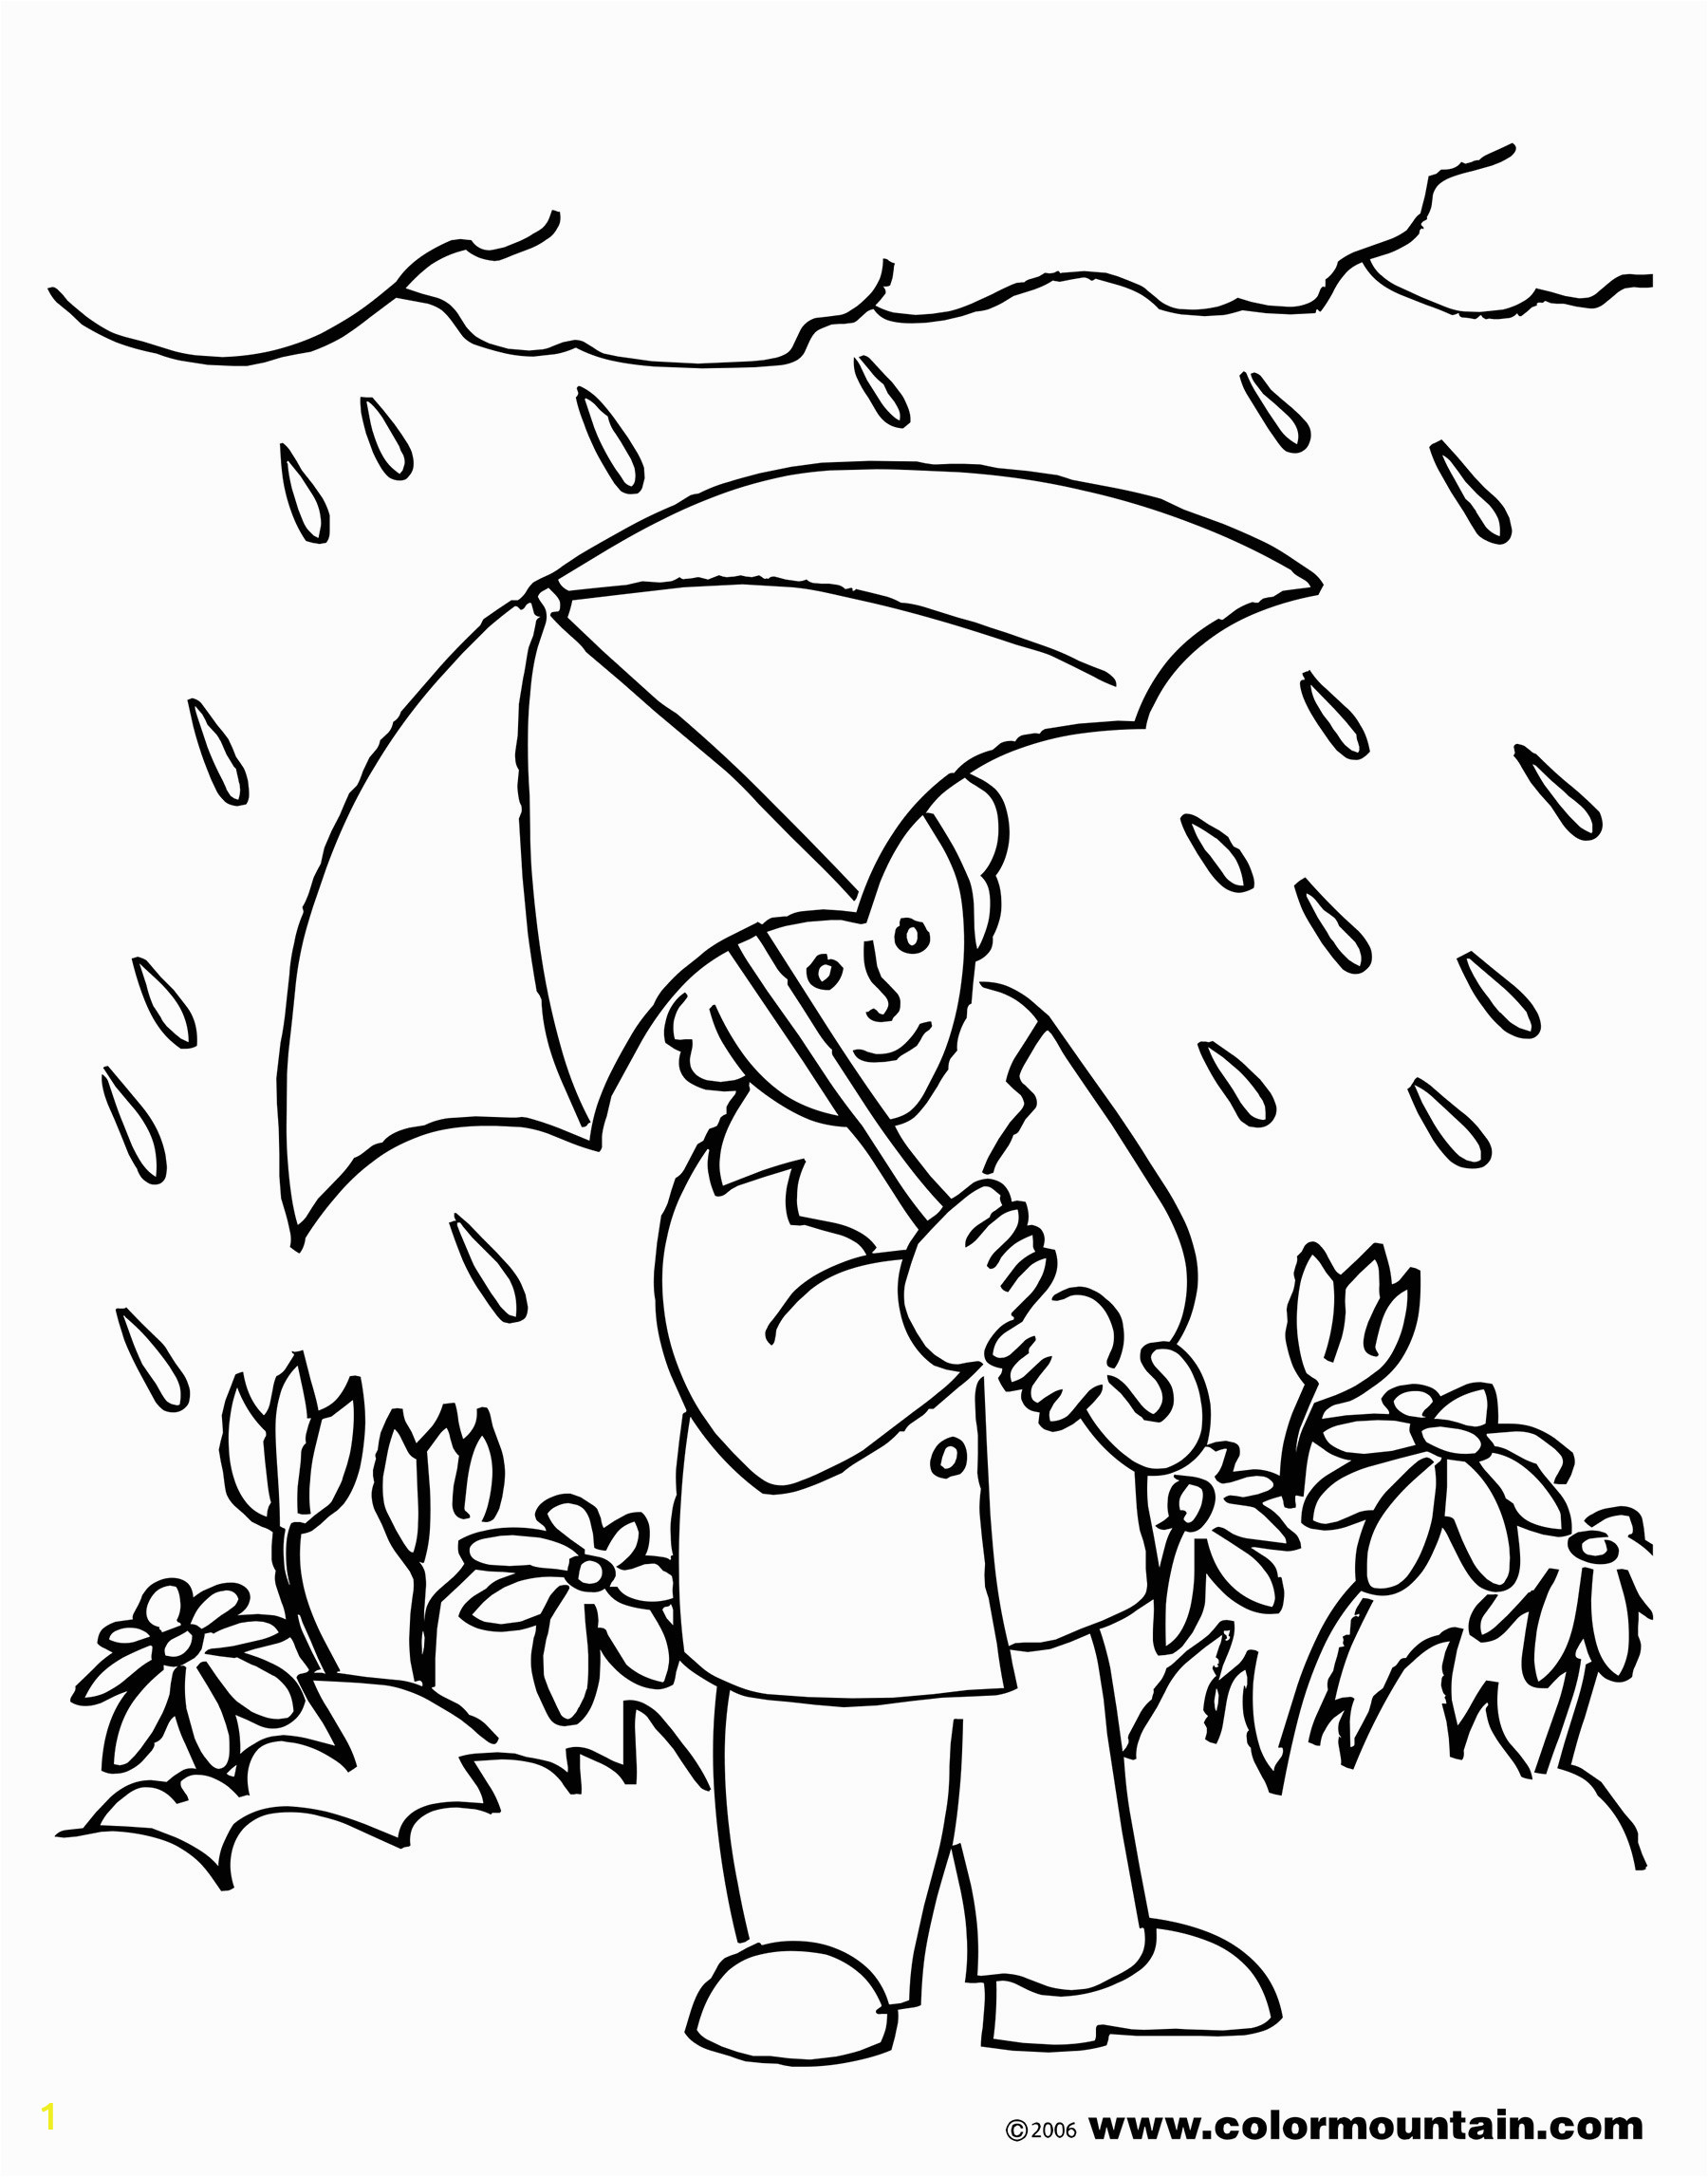 Coloring Pages for Rainy Days Free Rain Clipart Black and White Download Free Clip Art